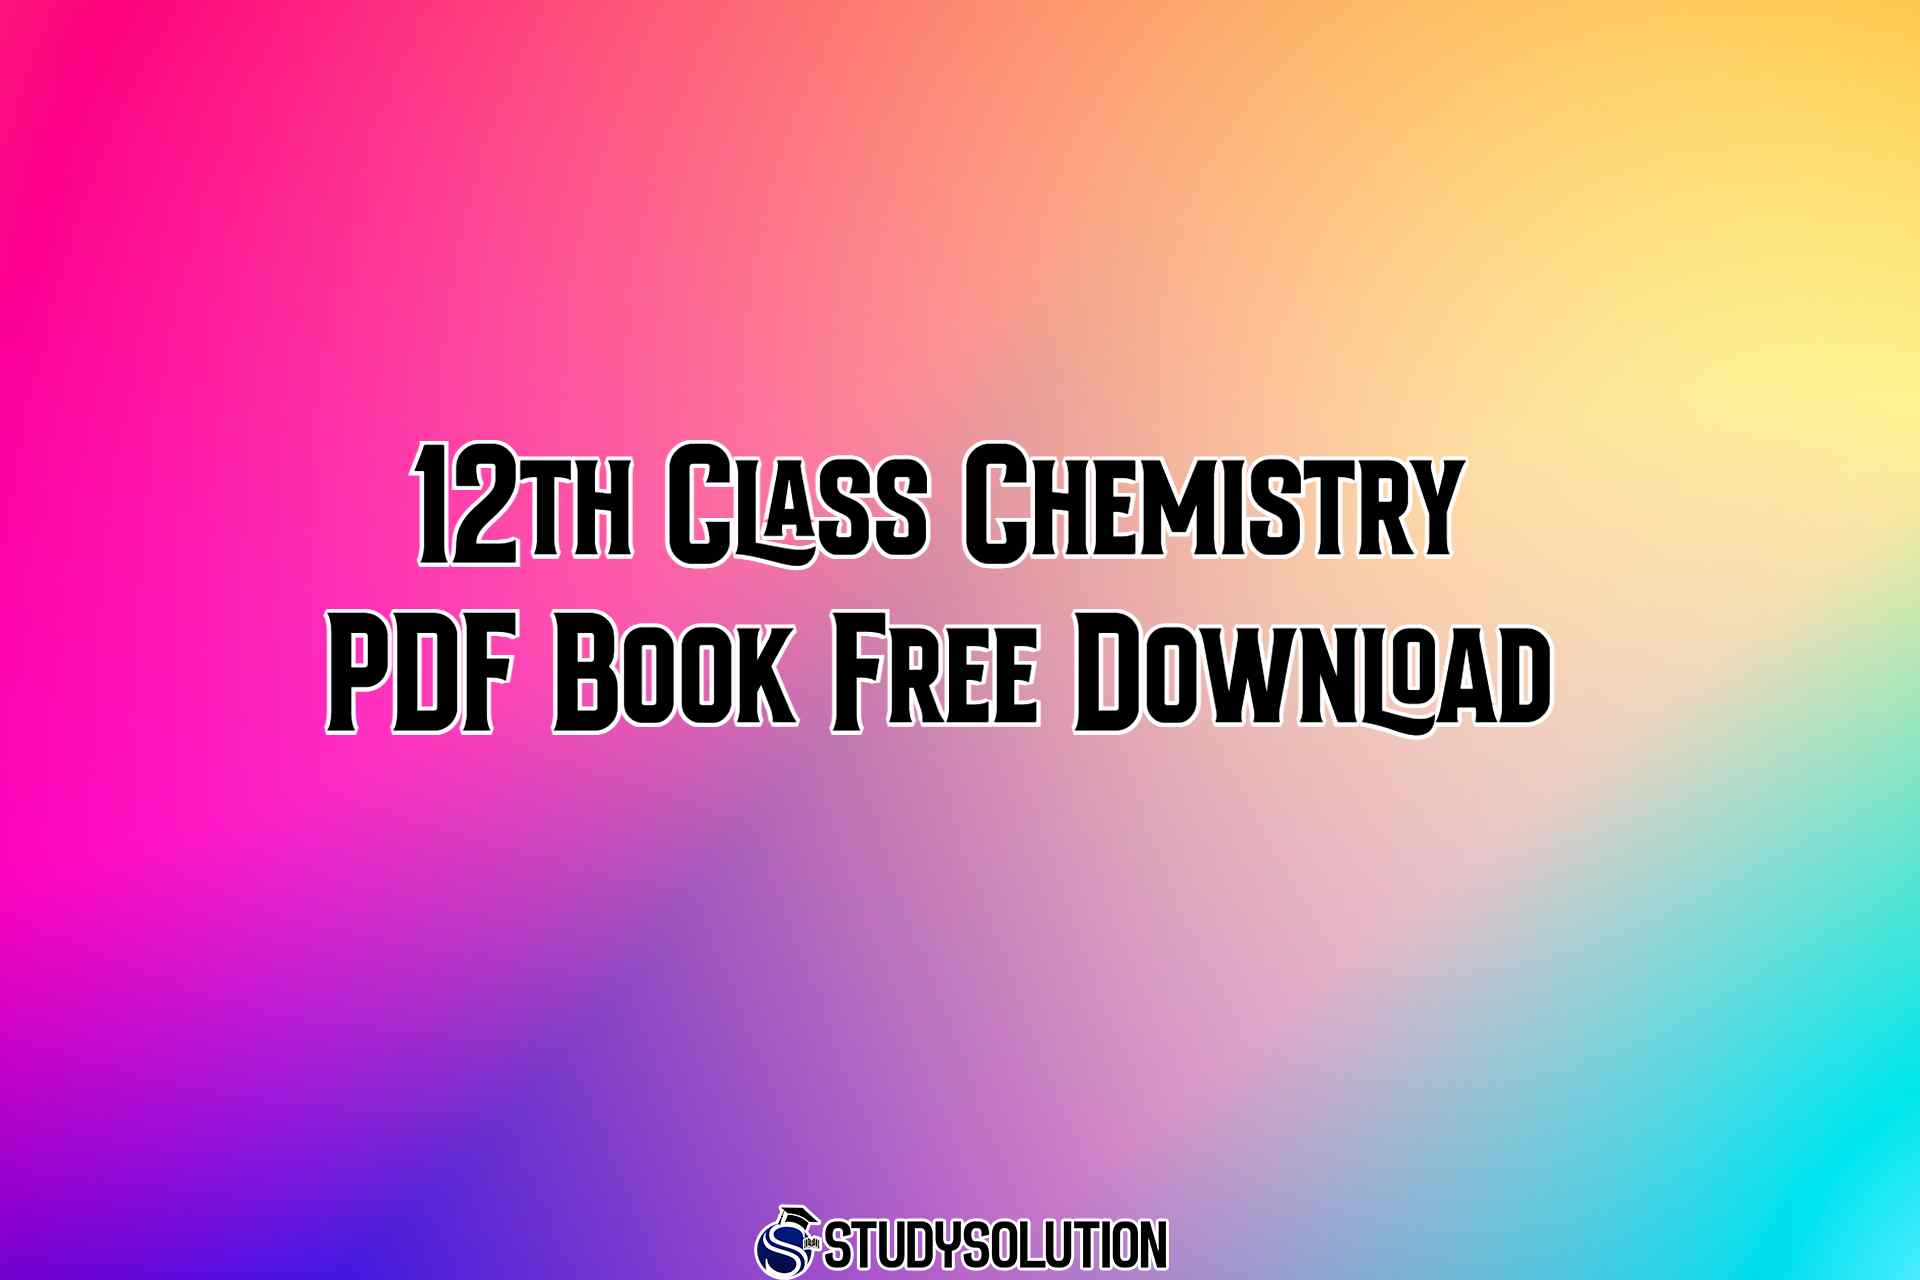 12th Class Chemistry PDF Book Free Download